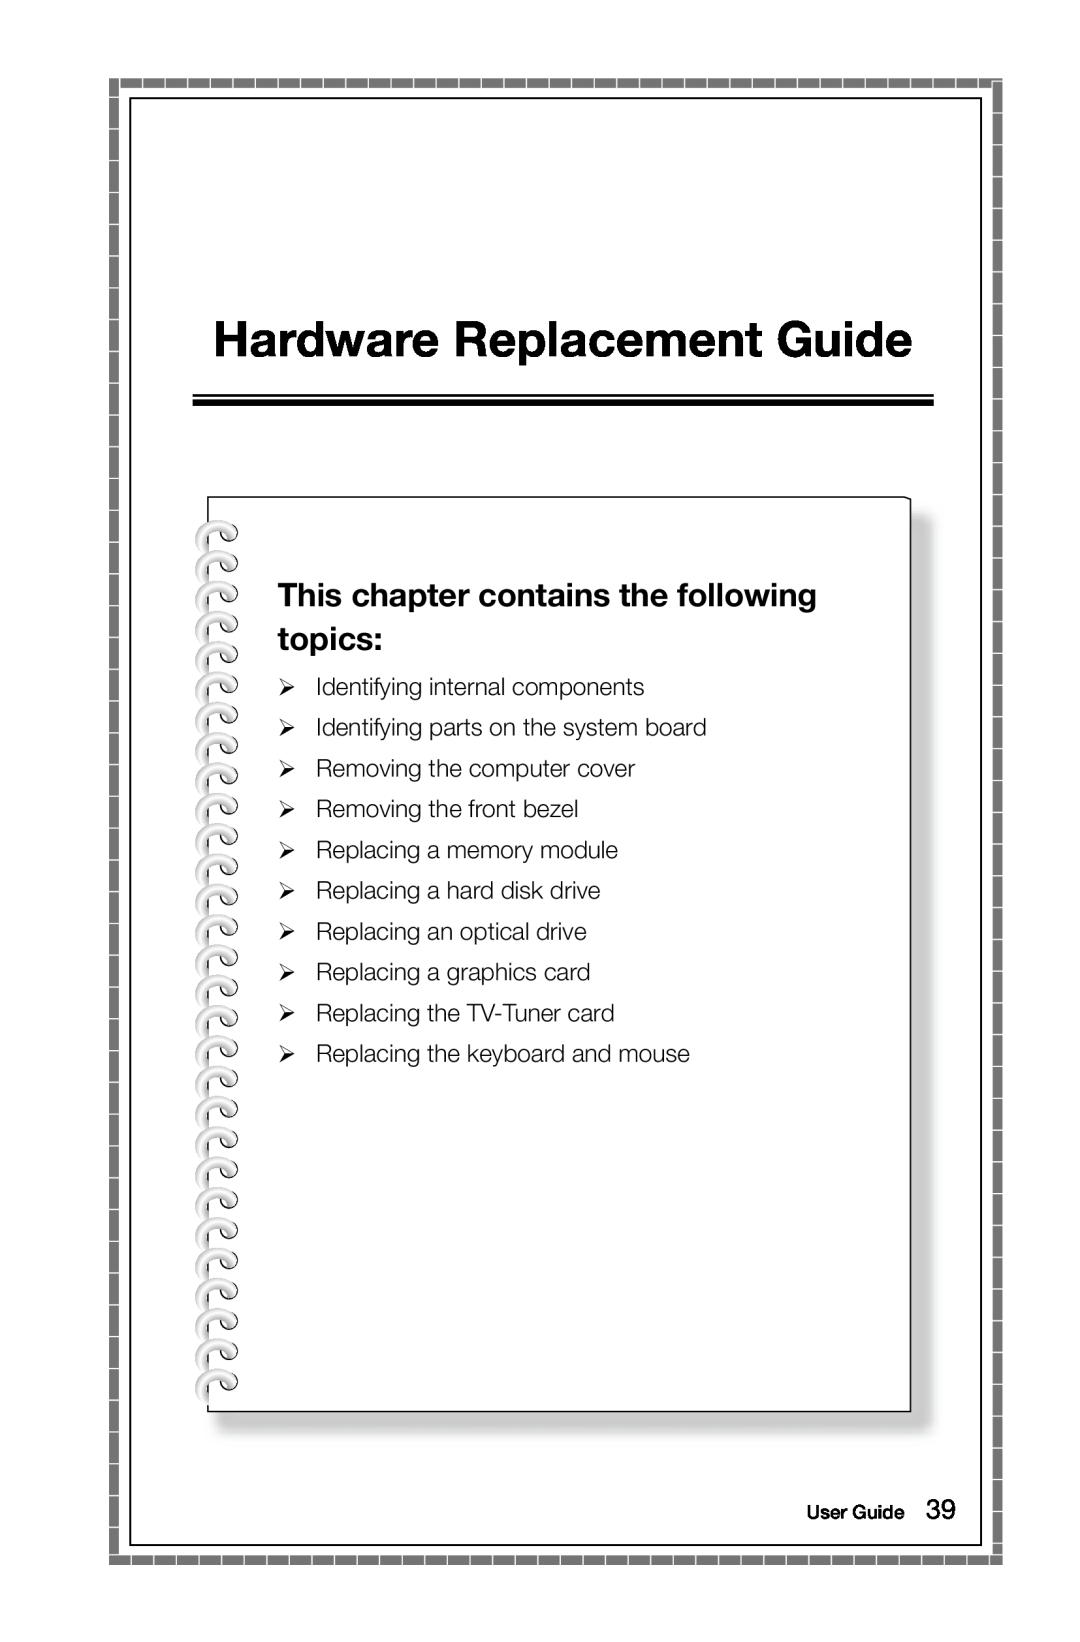 Lenovo 10090/2556/4748 [K415] manual Hardware Replacement Guide, This chapter contains the following topics, User Guide 